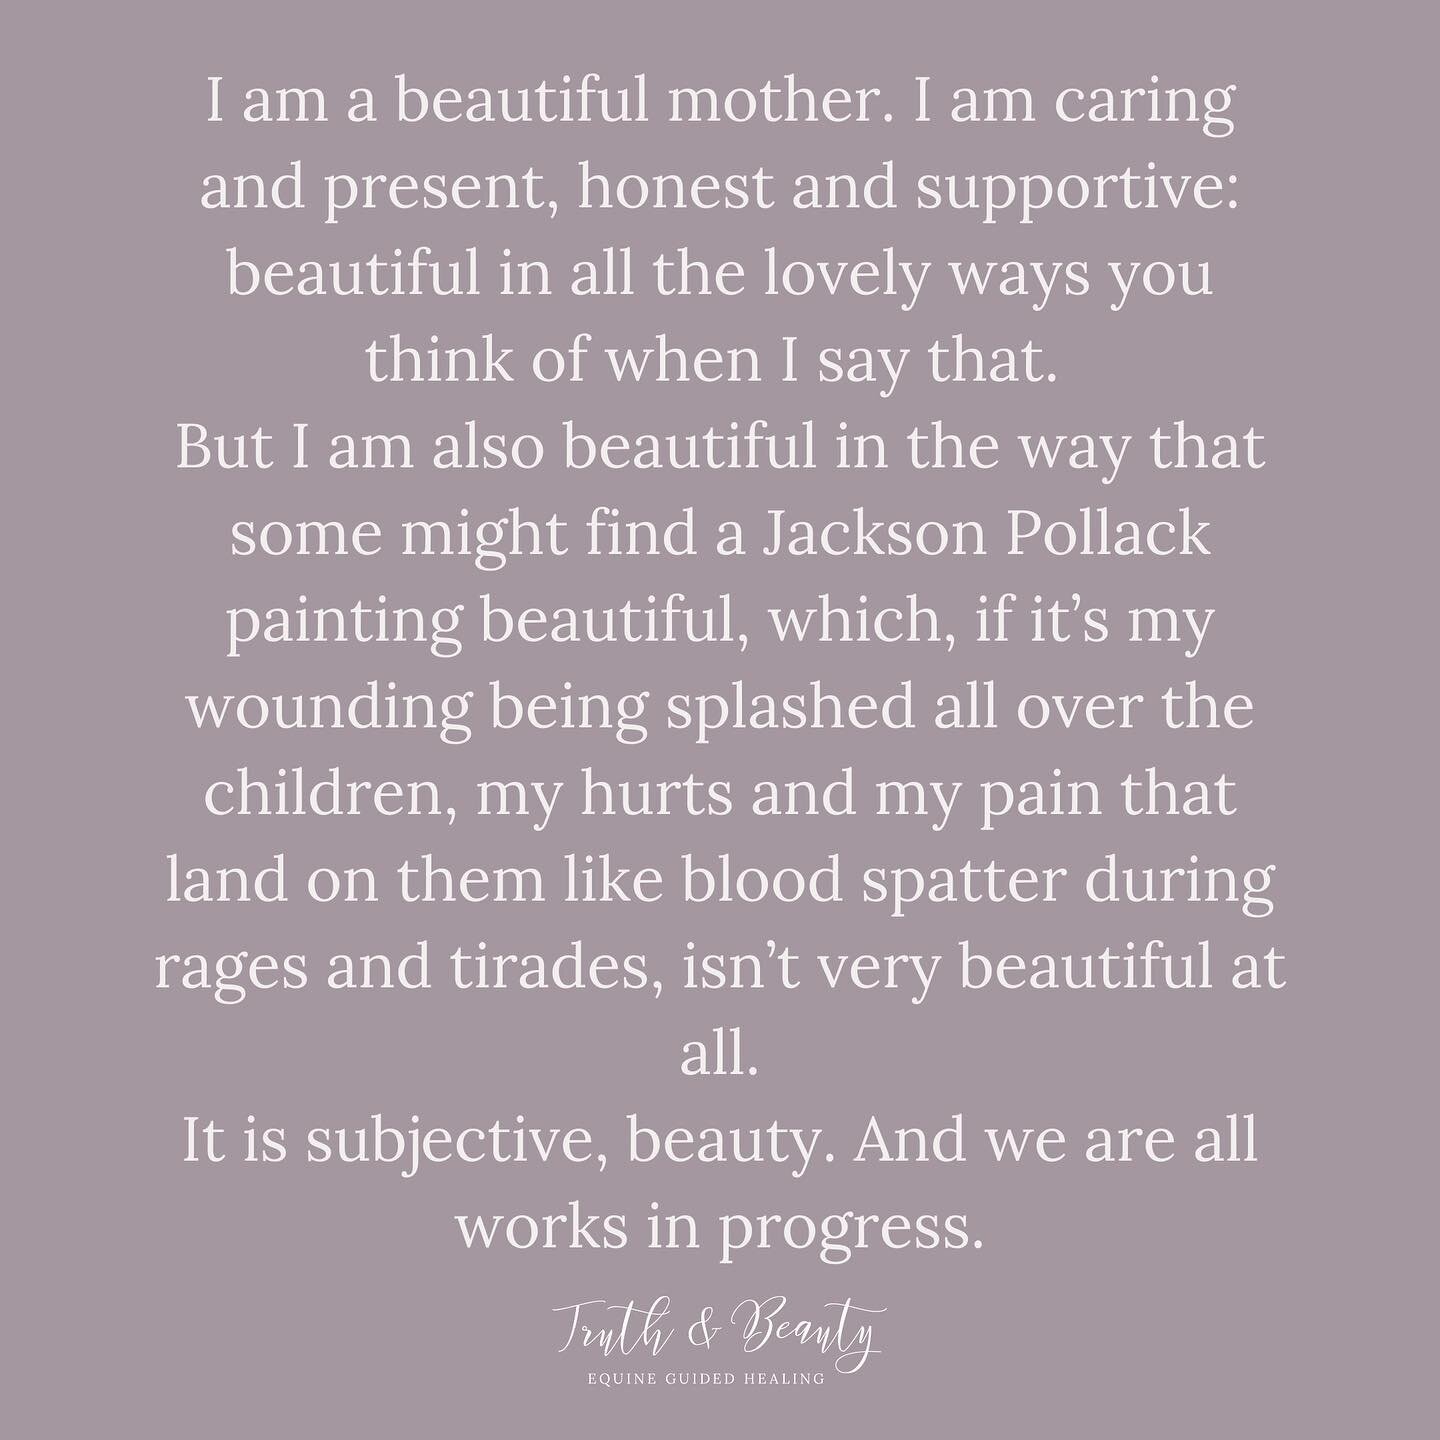 Dear sisters, for those of you who now find yourselves parenting around the clock, I want you to know that I am sending you love. Huge, gigantic love. Many of you shine during times like these, keen to craft and bake and spend precious time with your